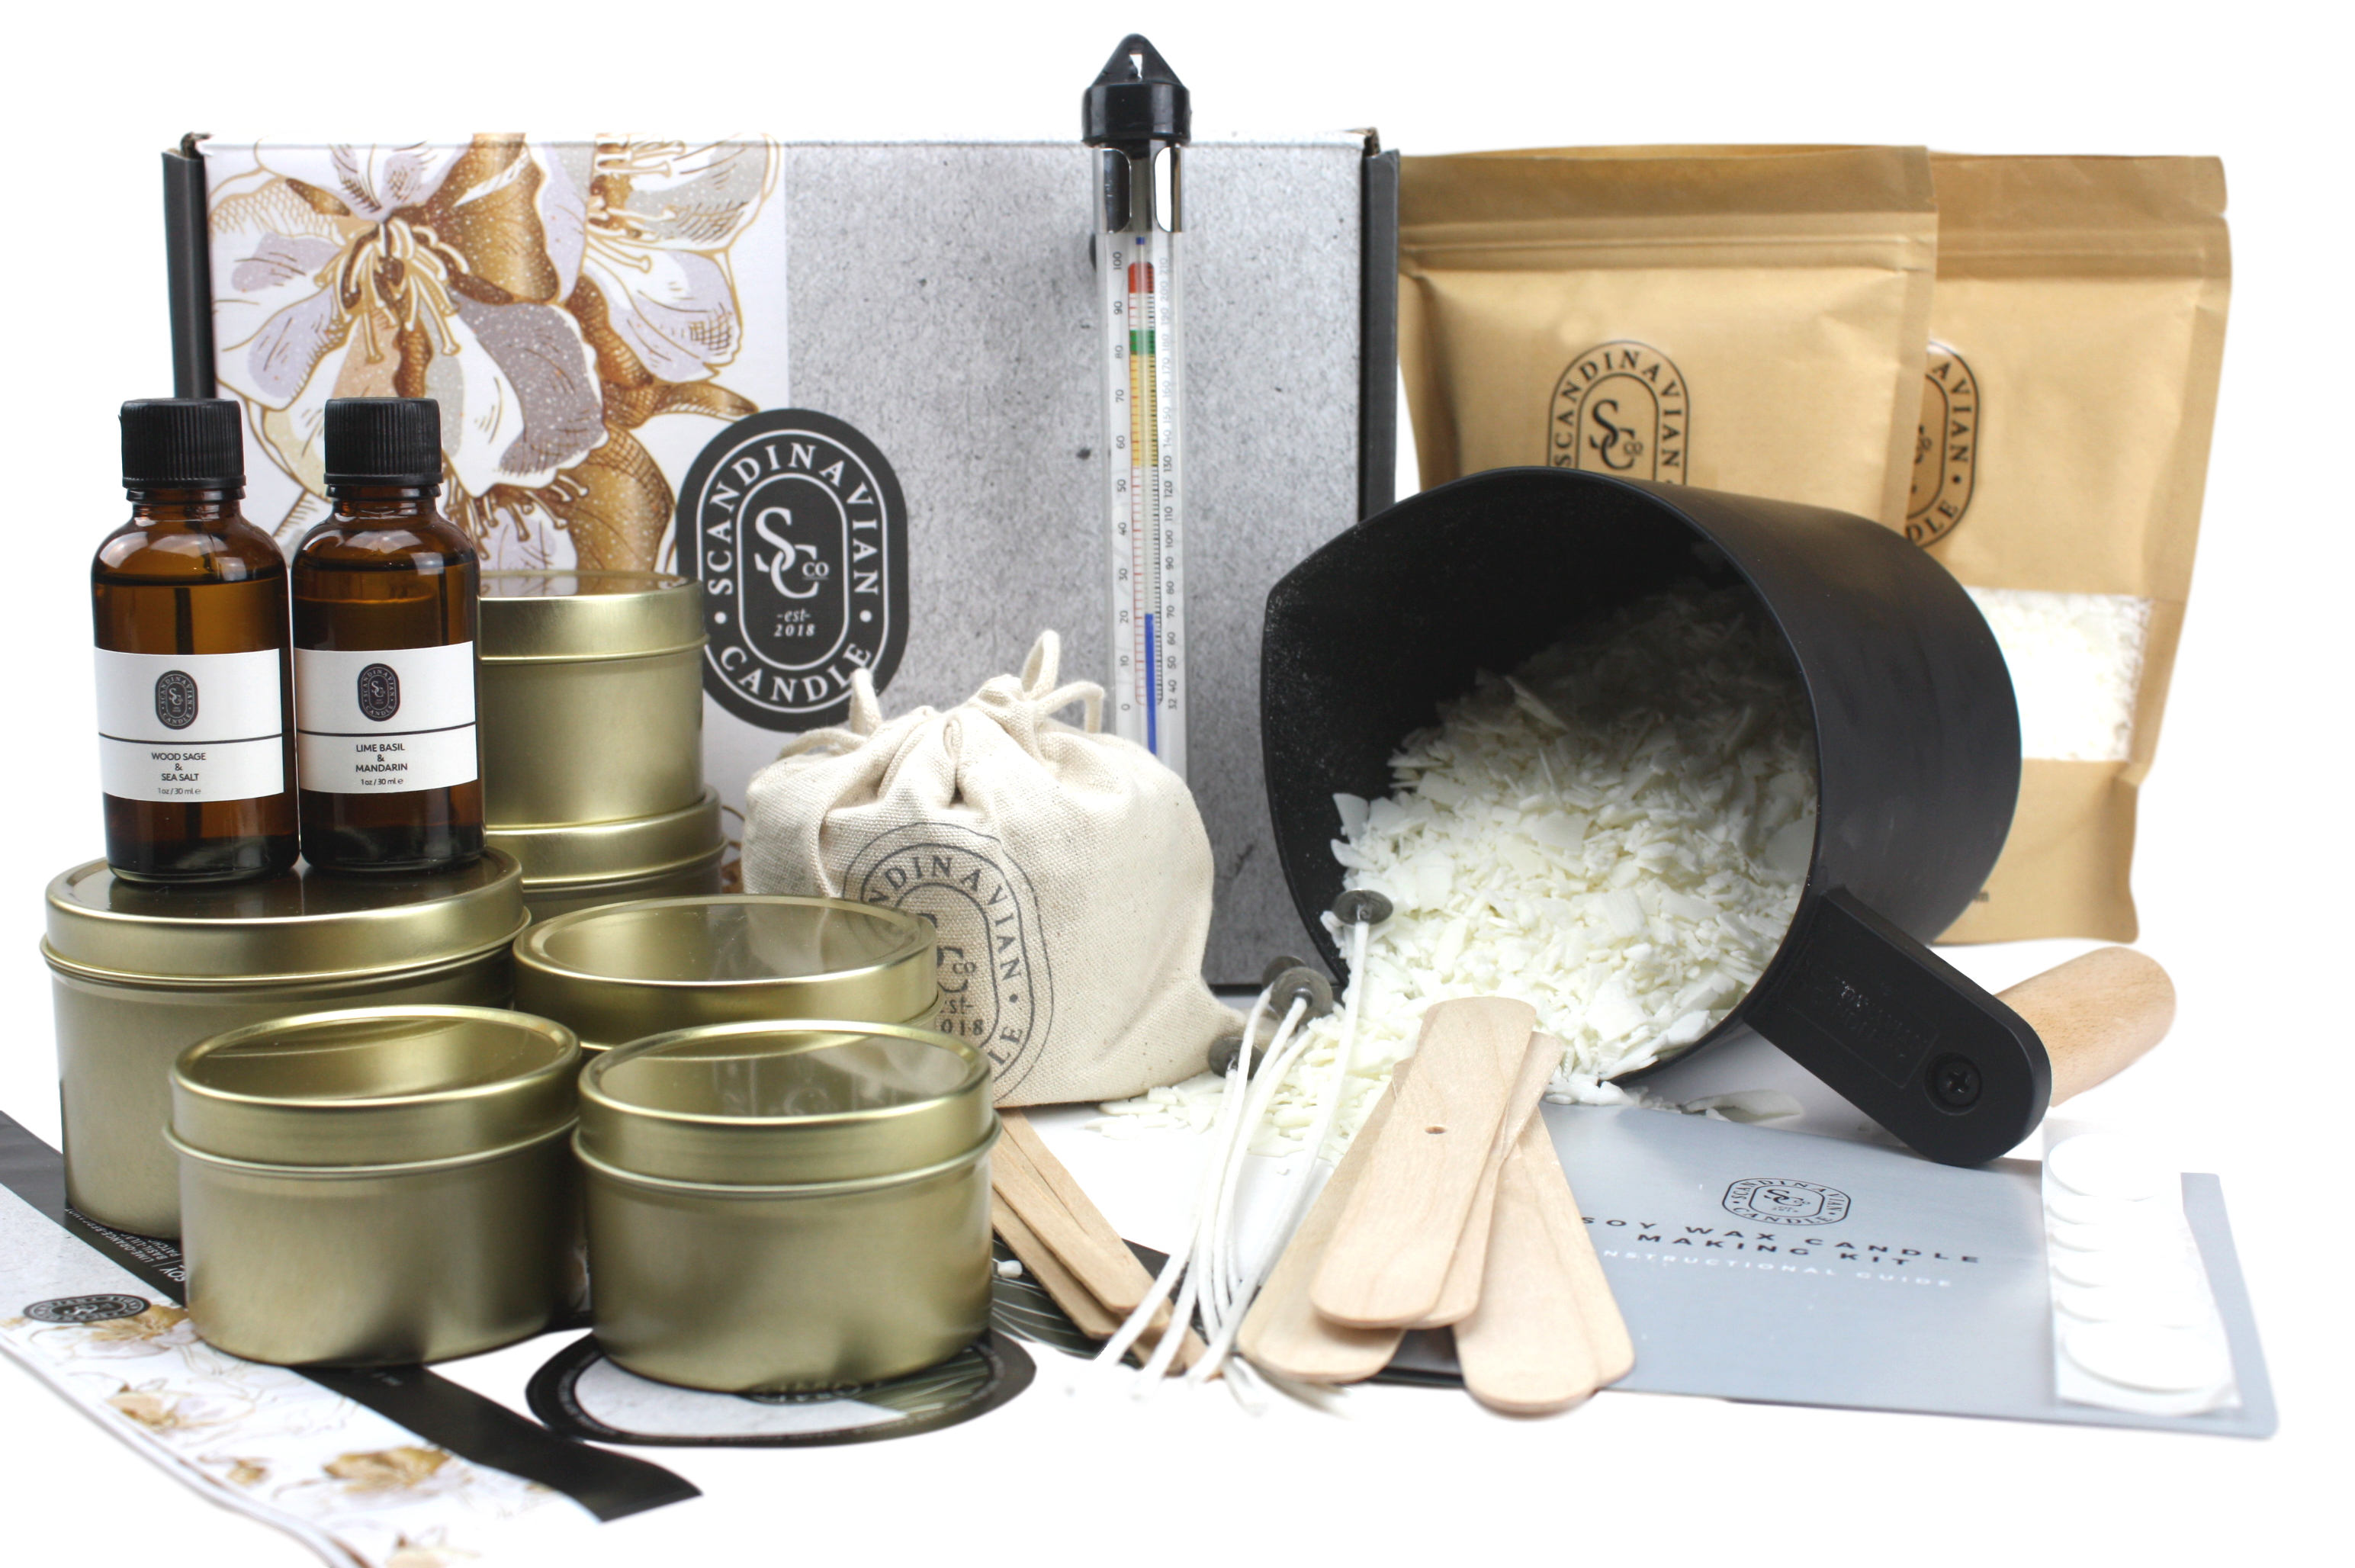 Better Candlemaking Kit - Soybeads